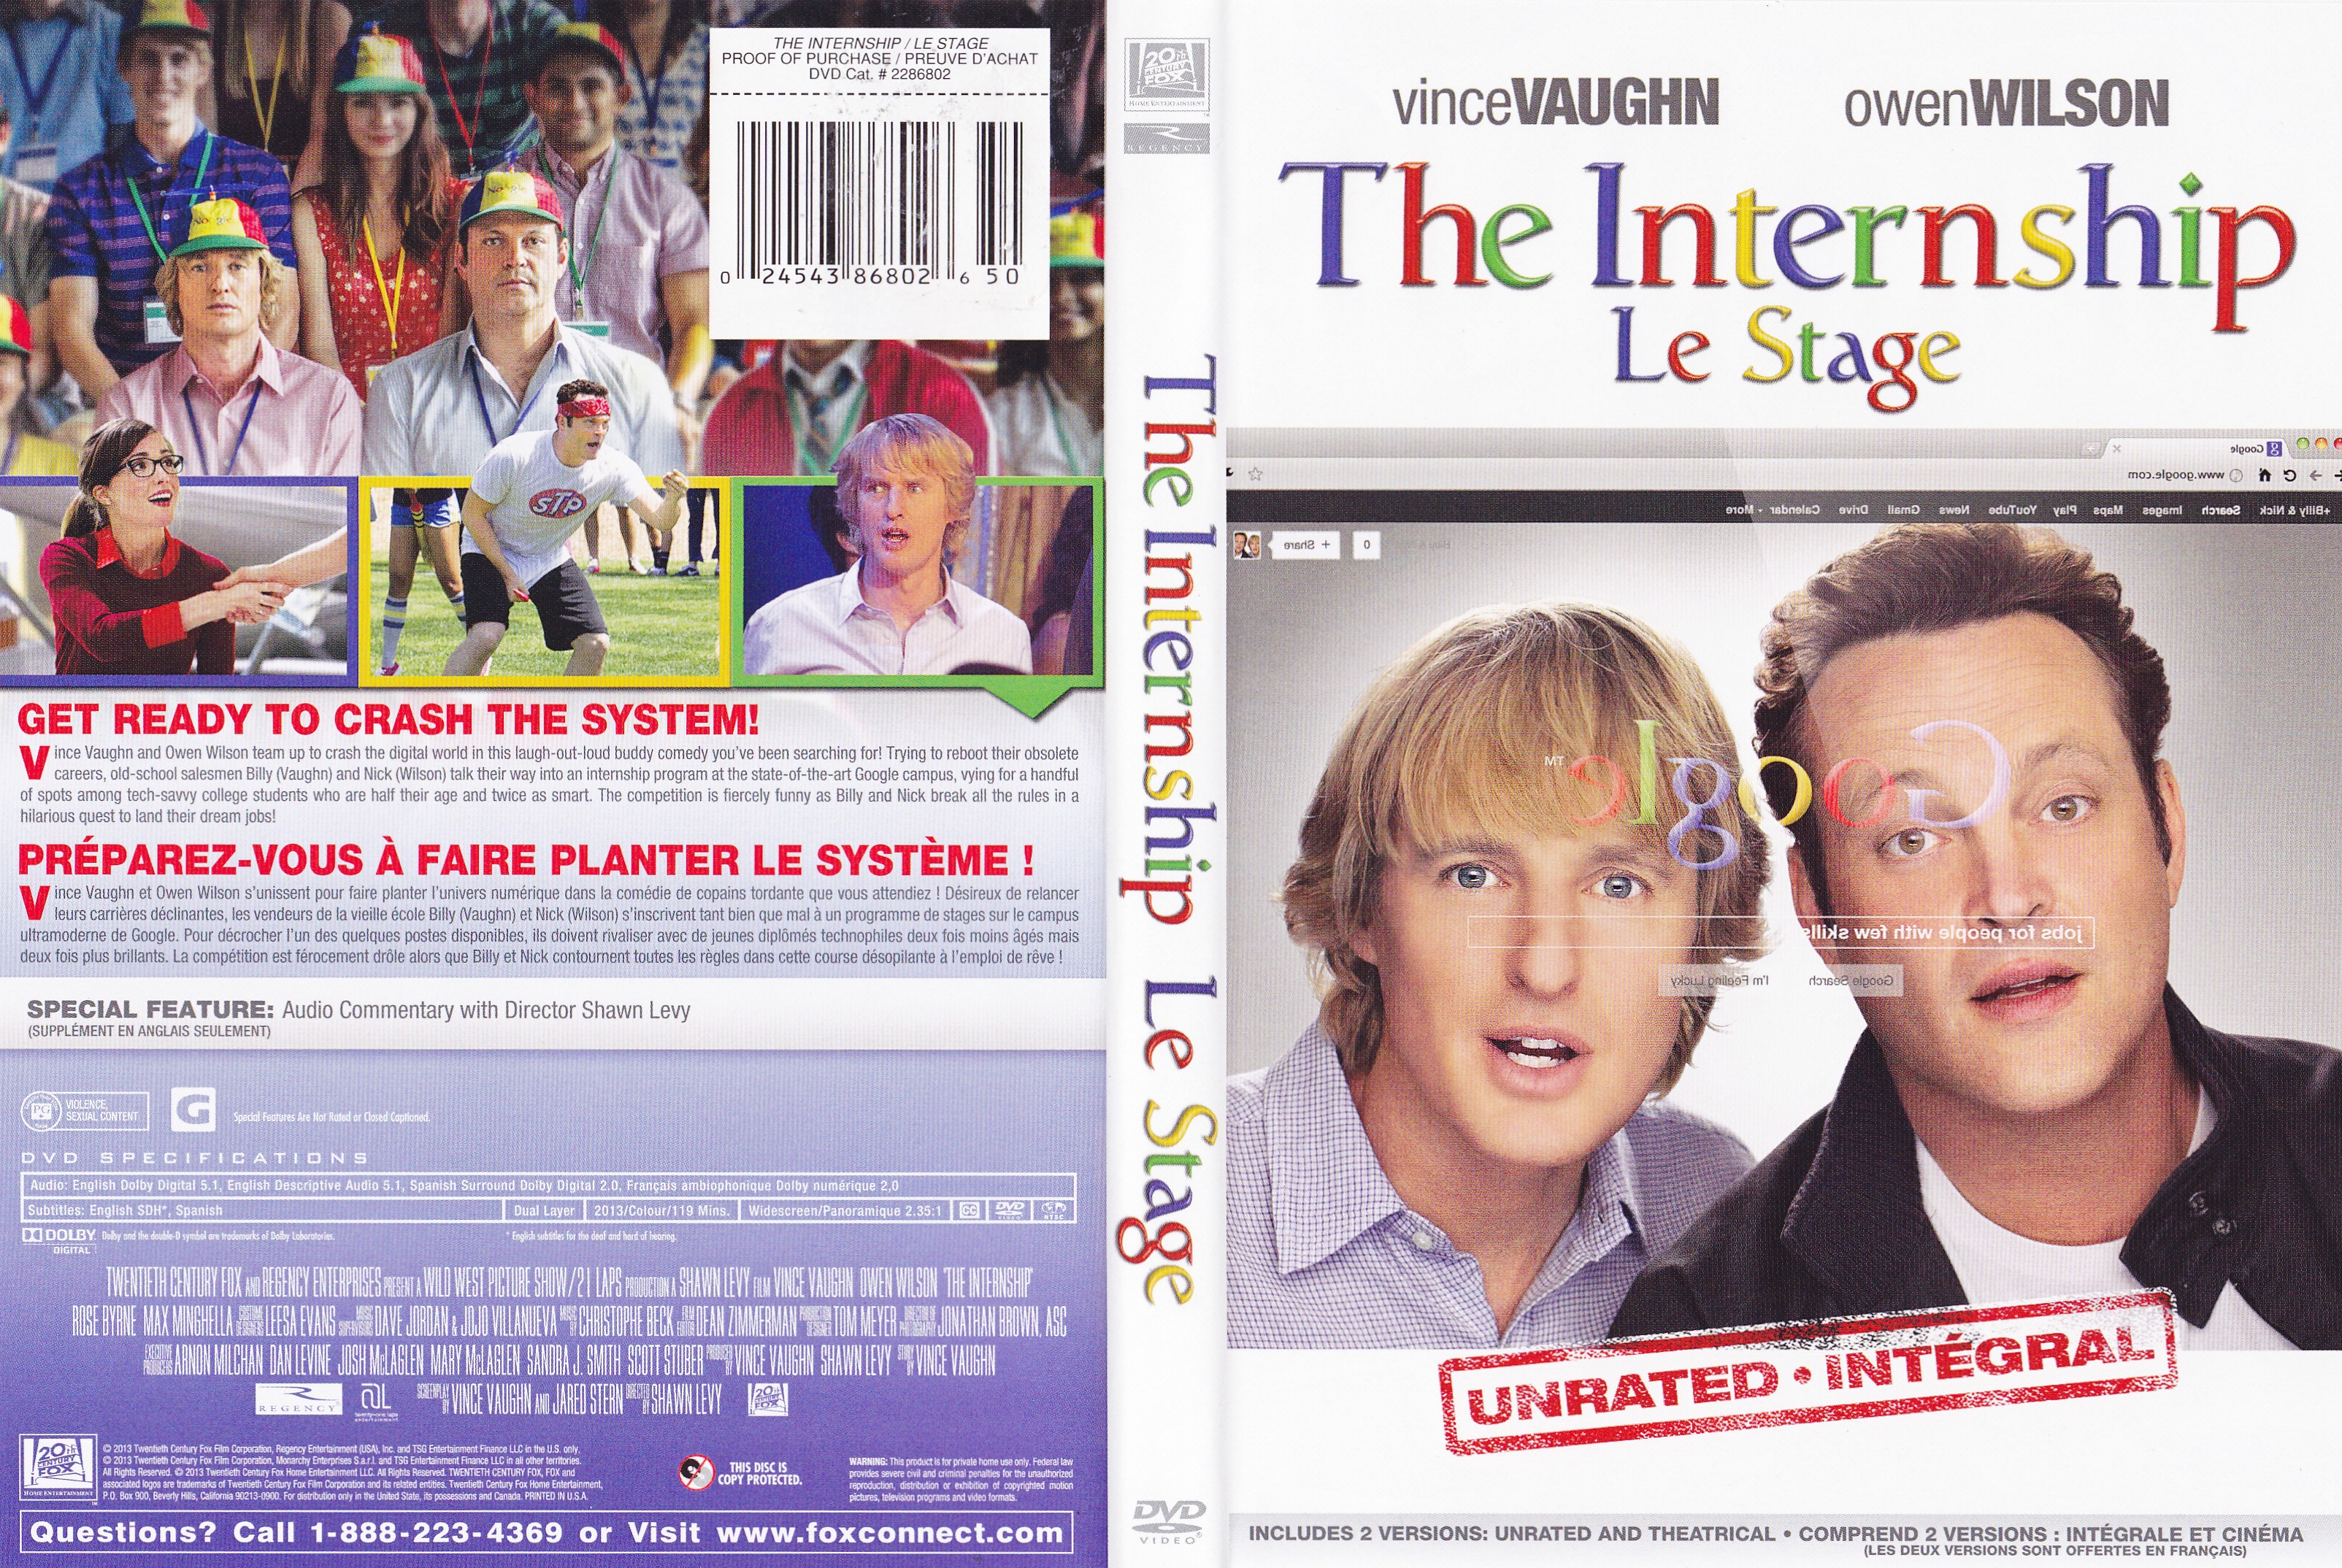 Jaquette DVD The internship - Le stage (Canadienne)